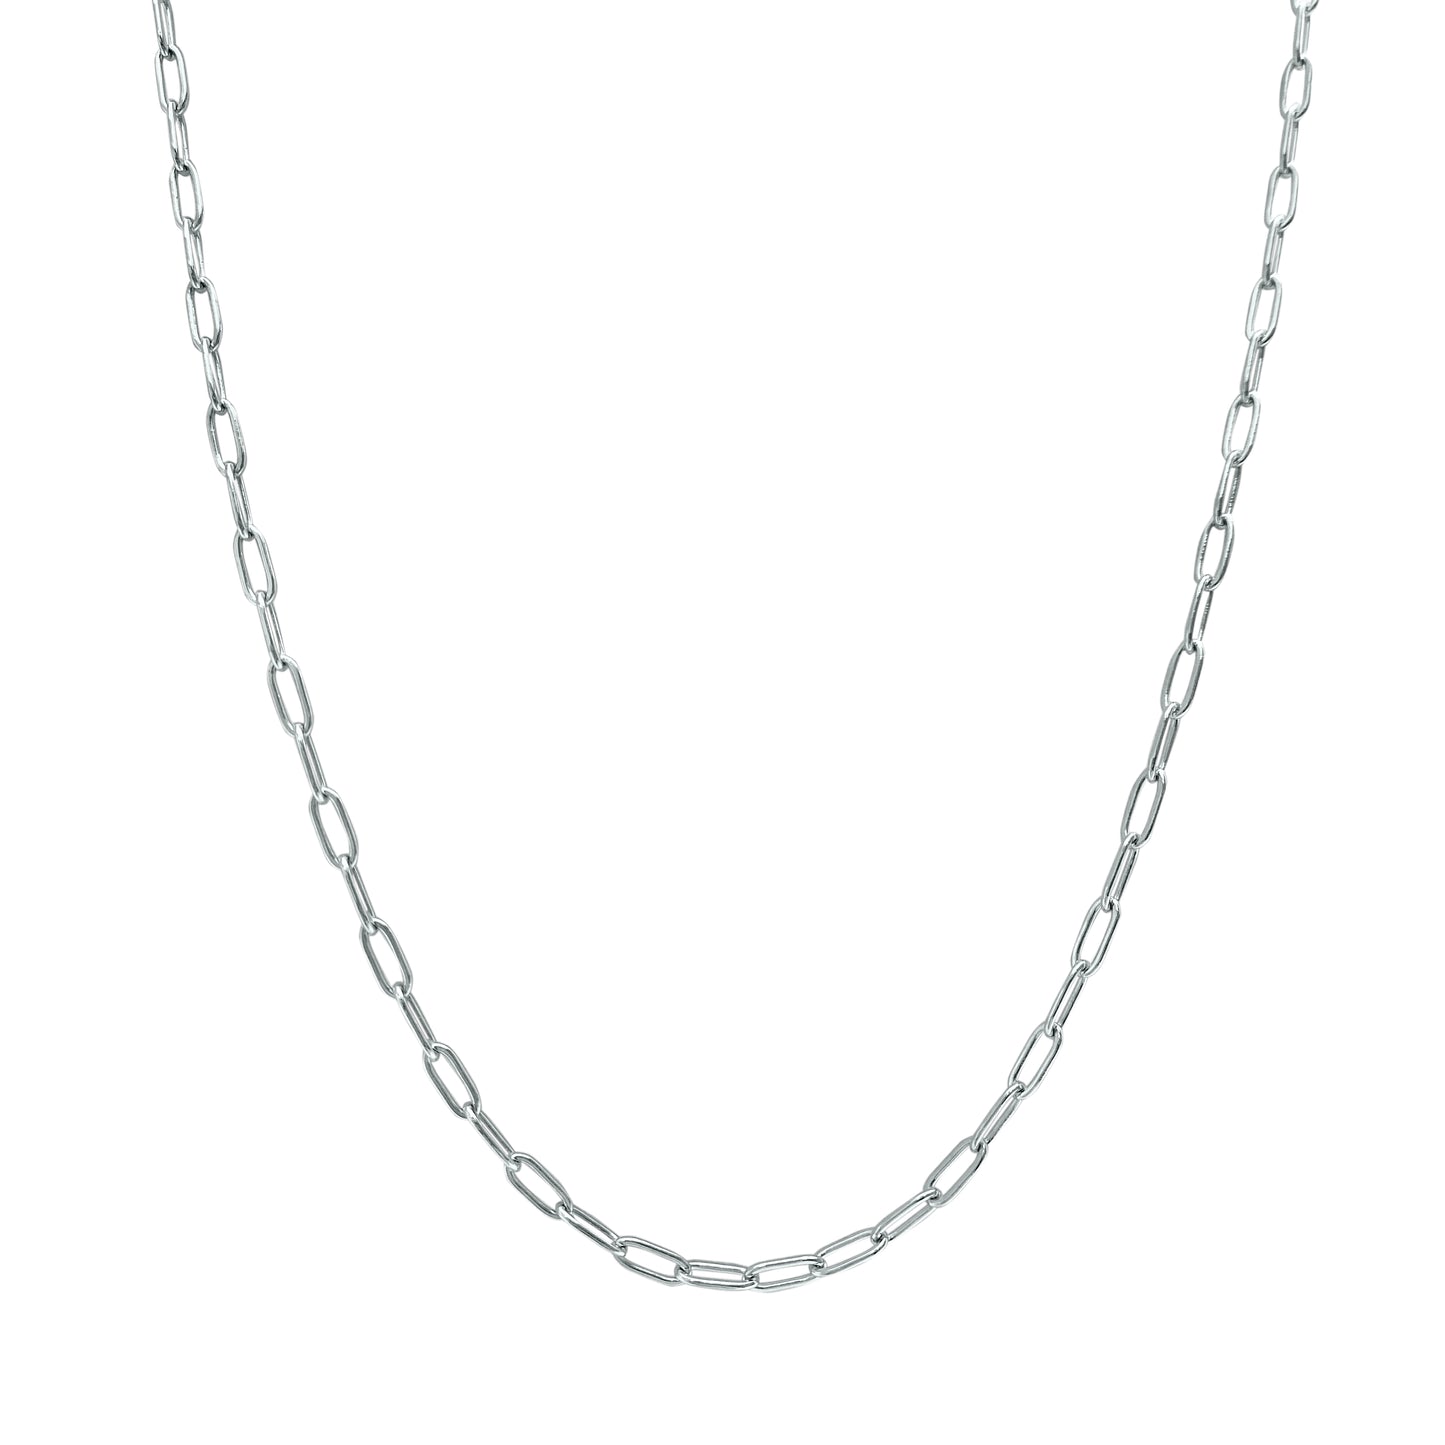 Styled Simply - Petite Paperclip Chain